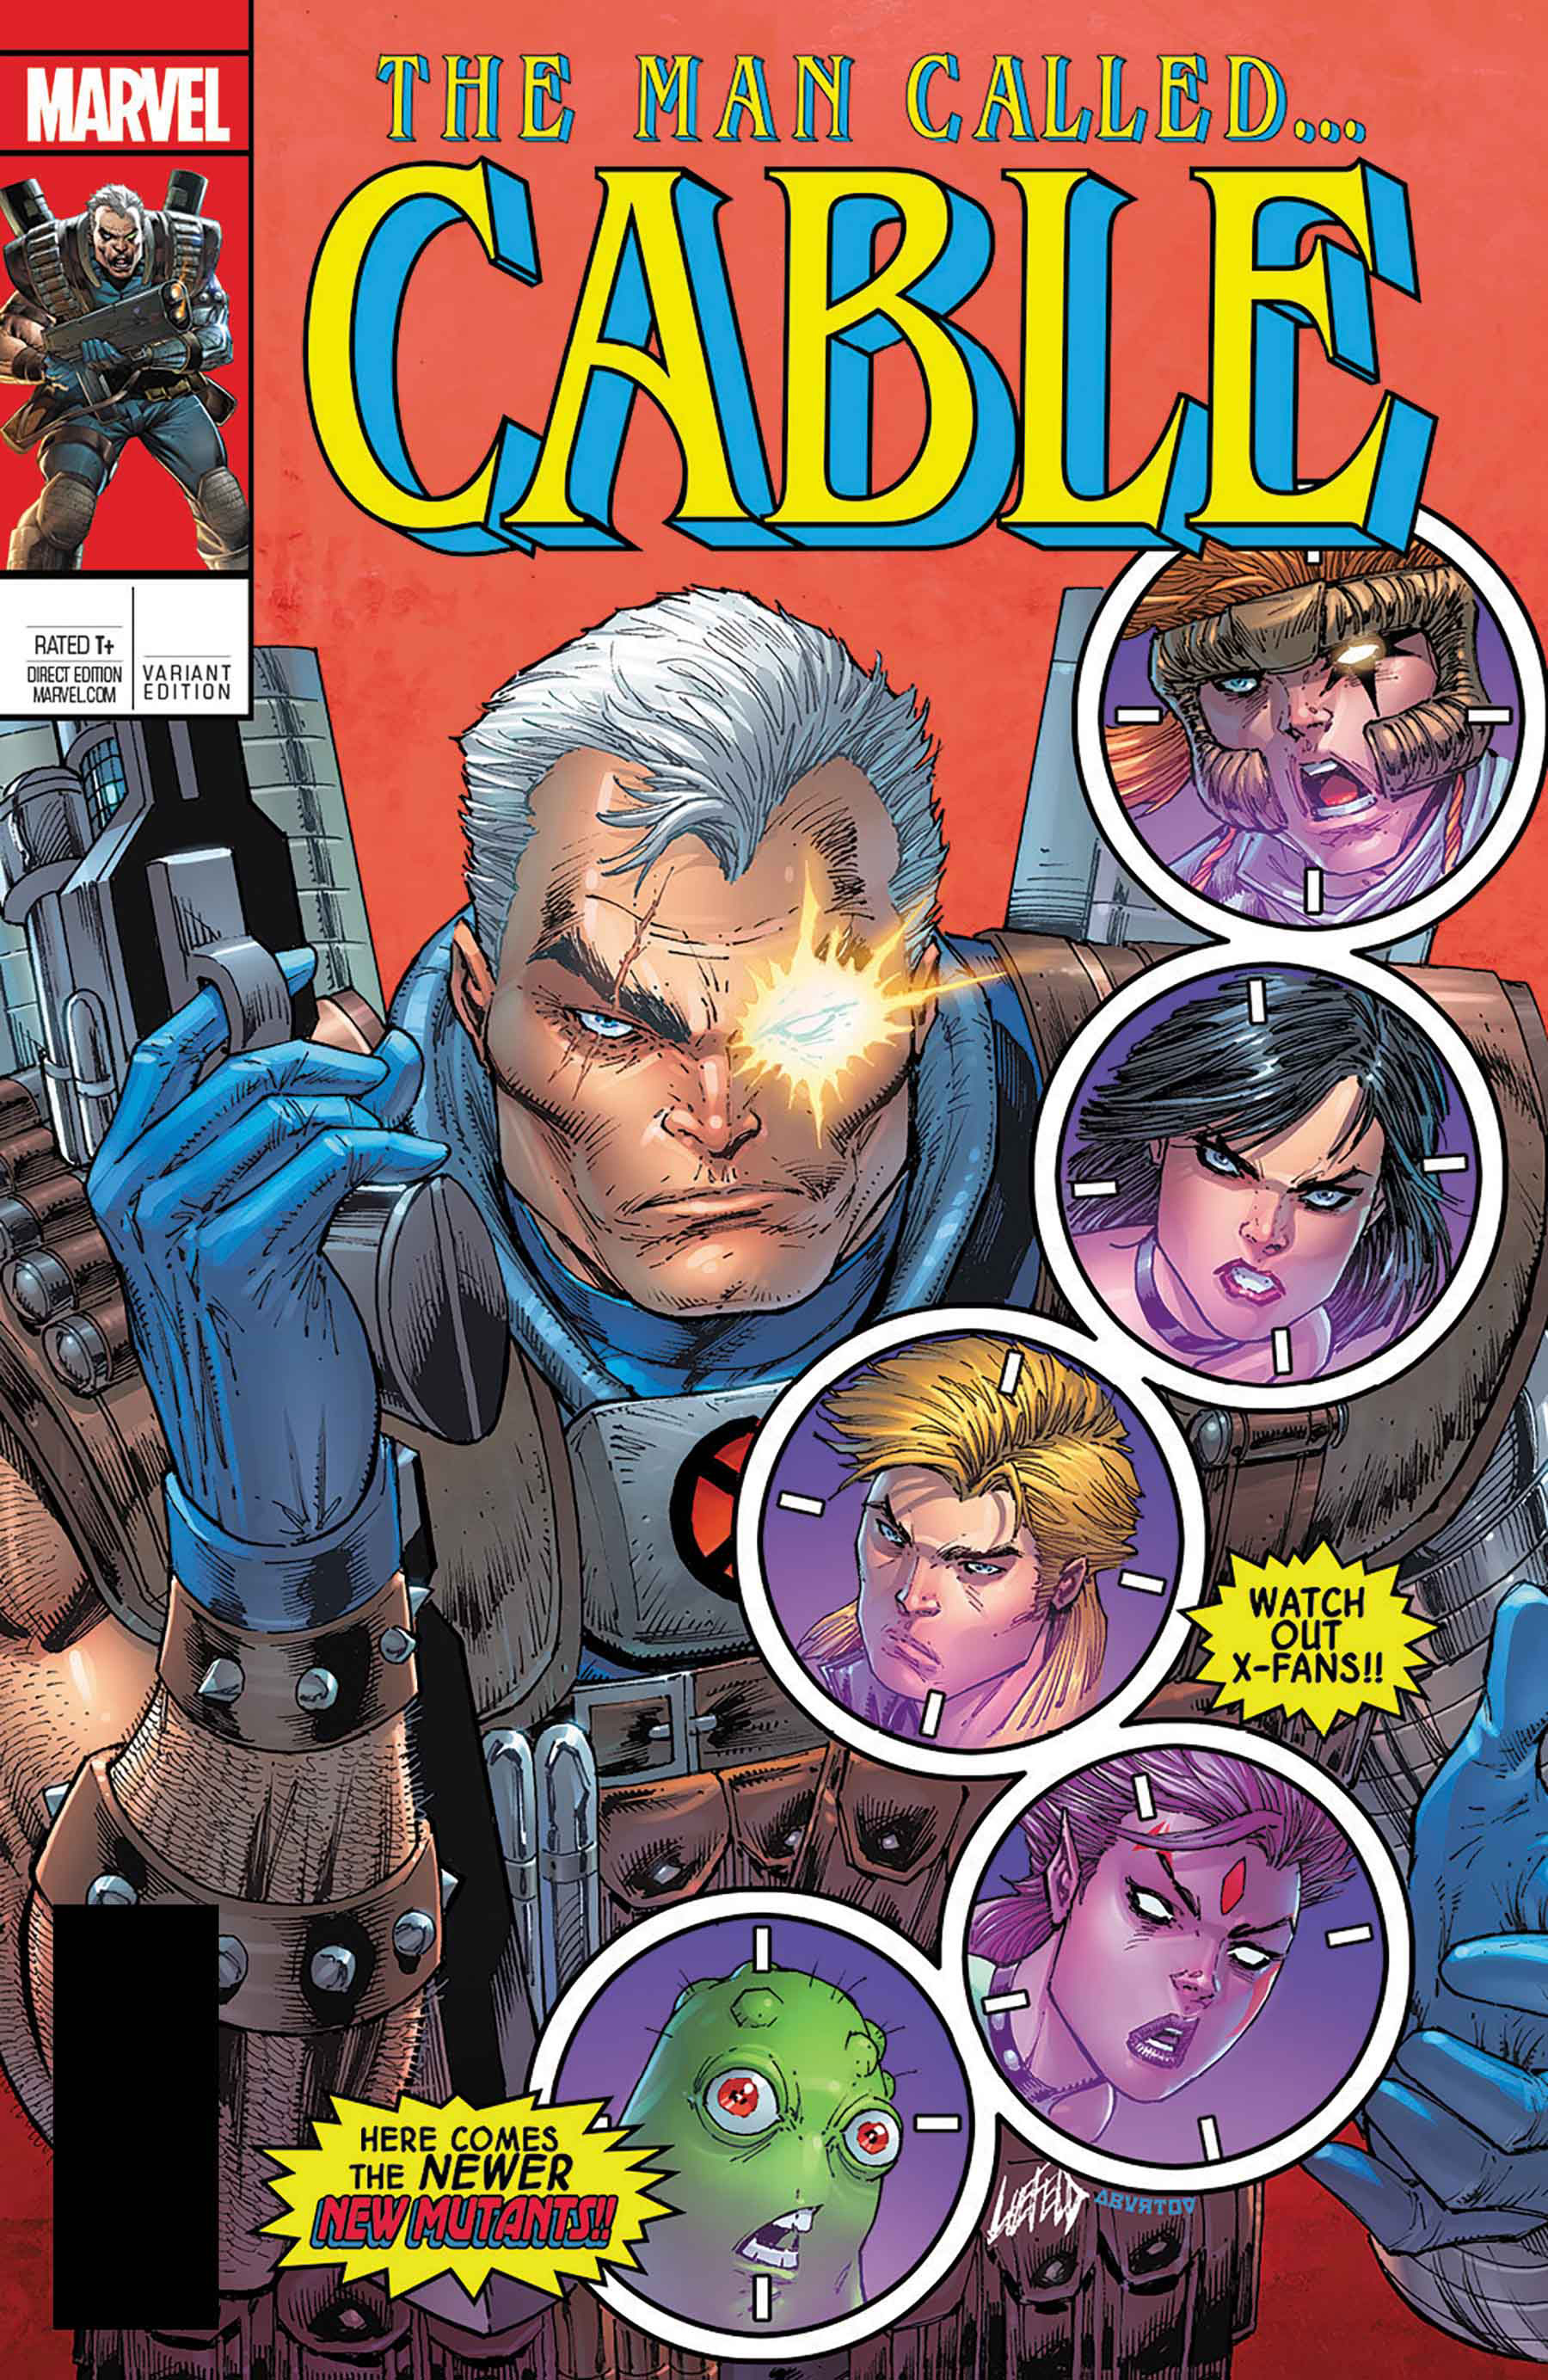 CABLE #150 VARIANT